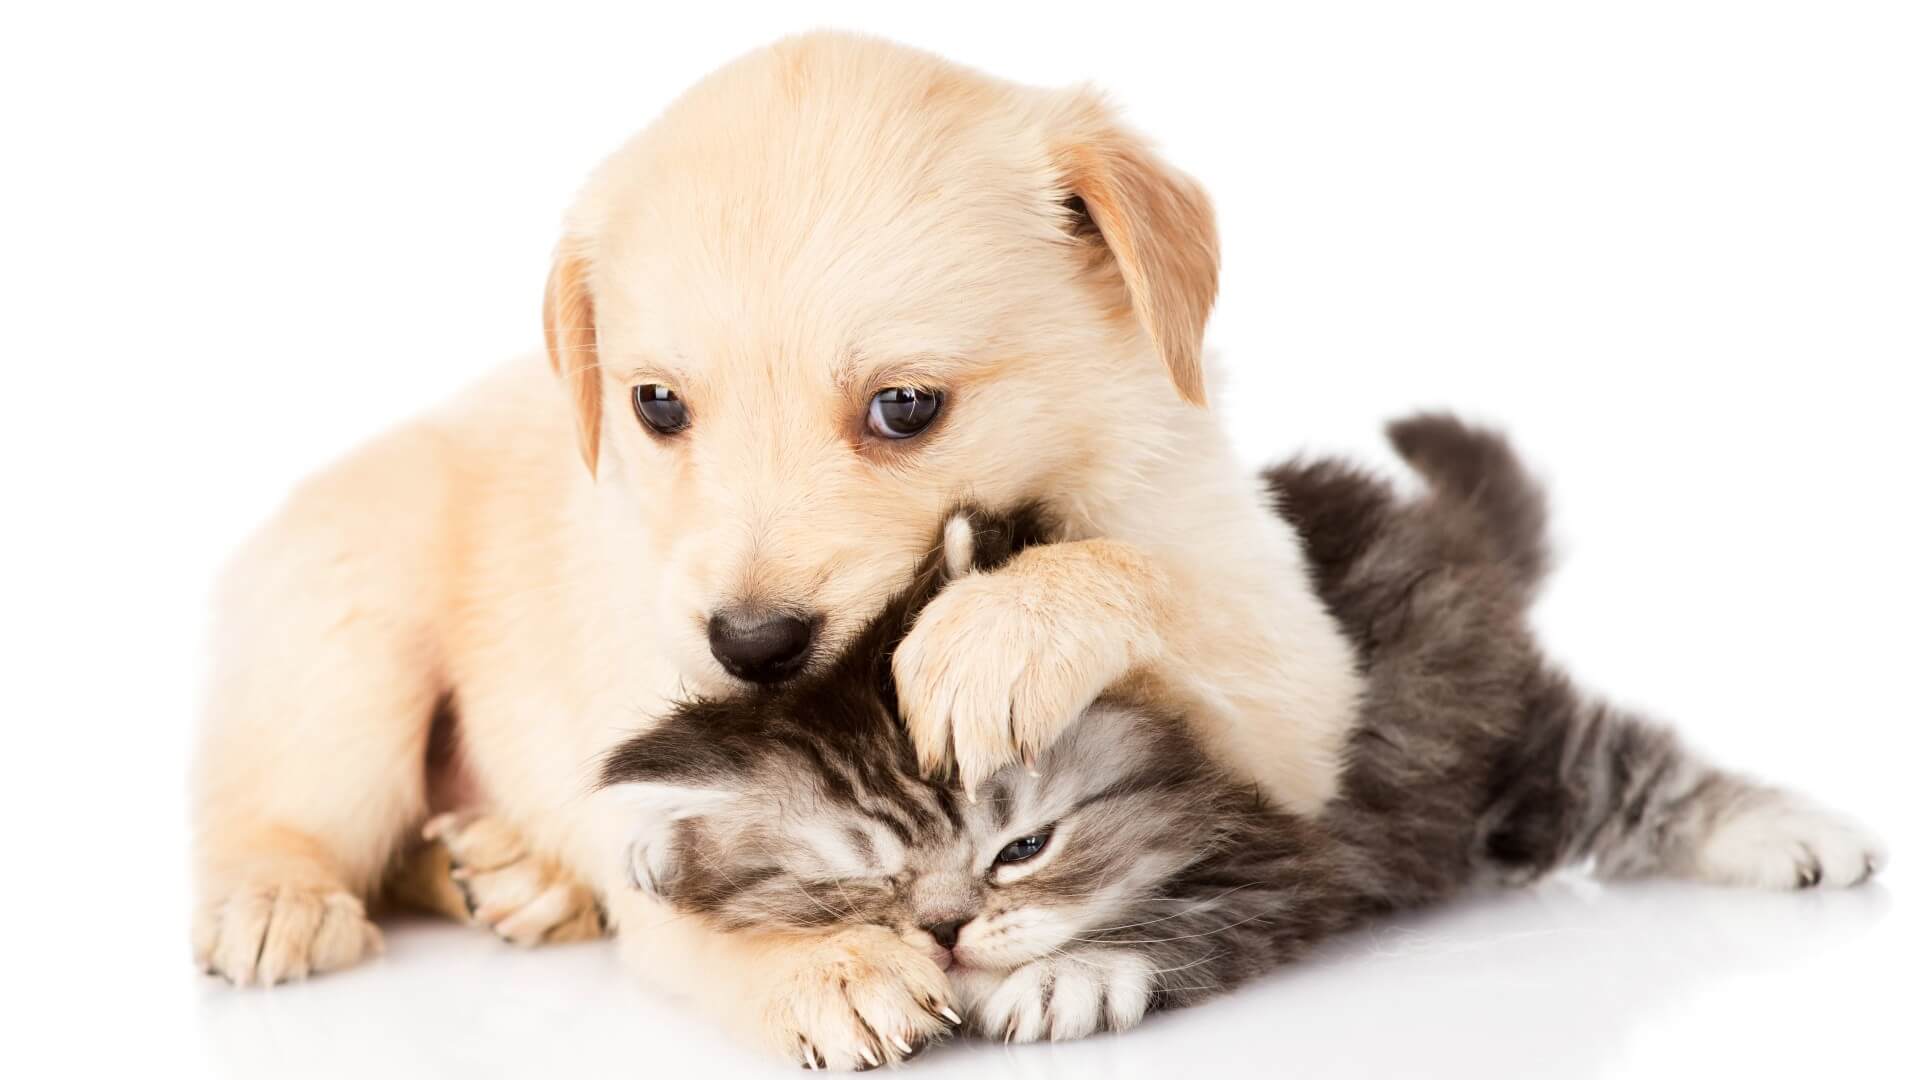  Puppies And Kittens